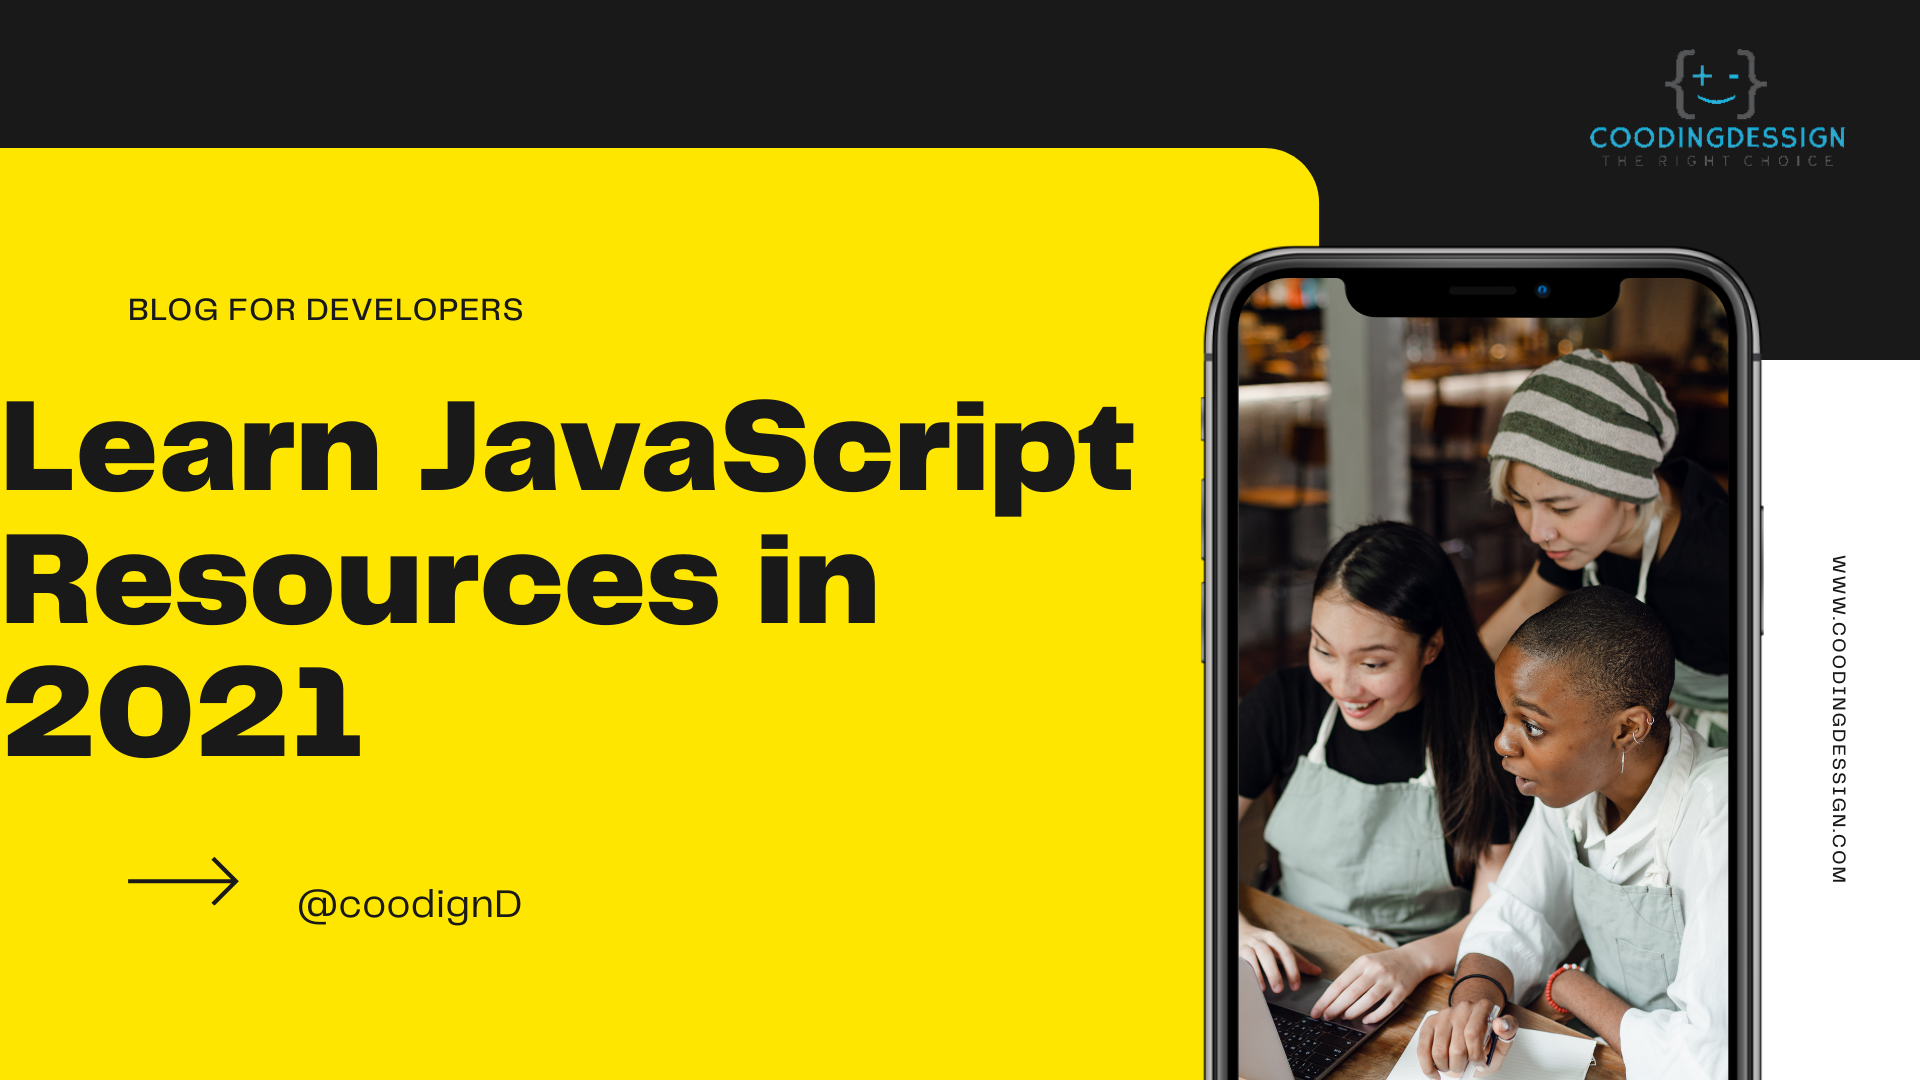 Learn JavaScript resources in 2021